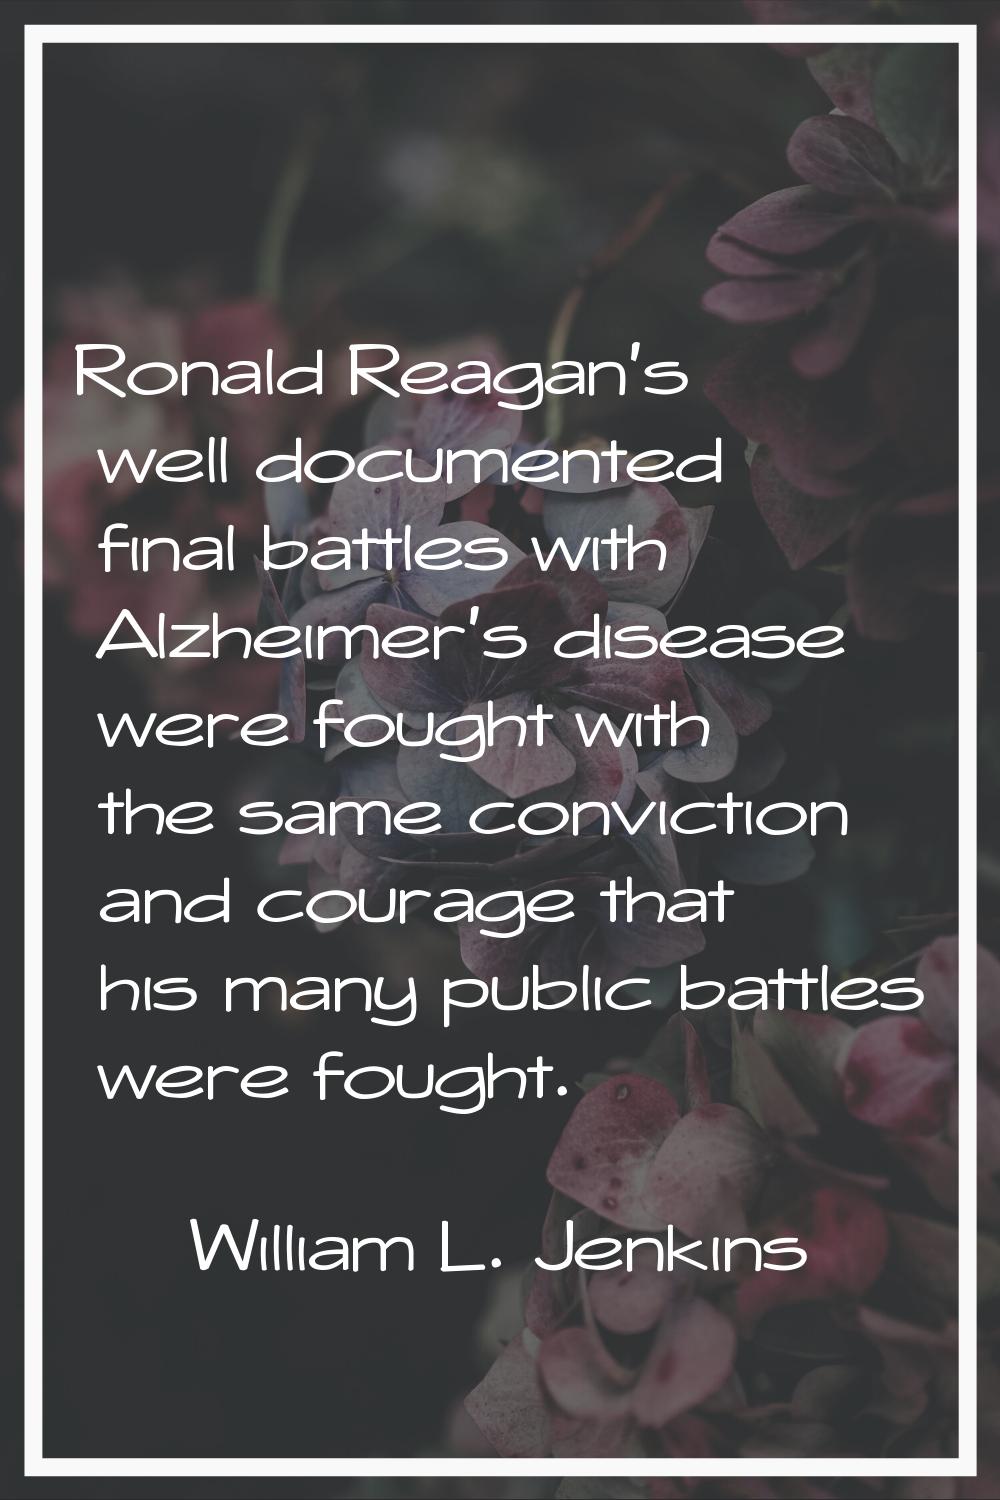 Ronald Reagan's well documented final battles with Alzheimer's disease were fought with the same co